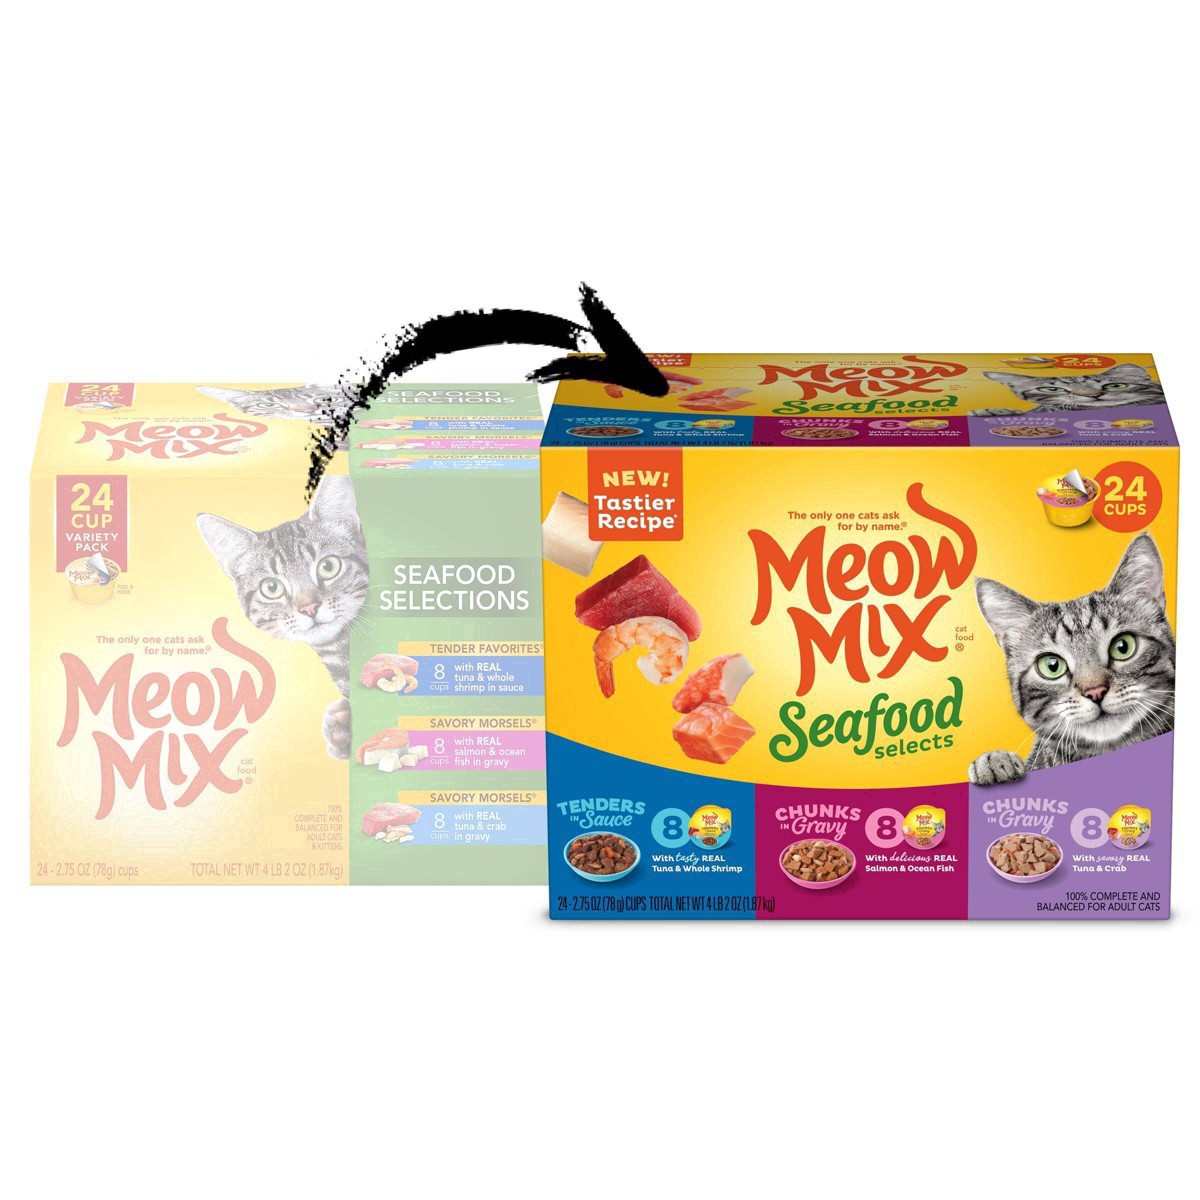 slide 4 of 27, Meow Mix Seafood Selects Wet Cat Food Variety Pack, 24 Cups, 2.75 Oz. Each (Packaging And Formulation Updates Underway), 24 ct